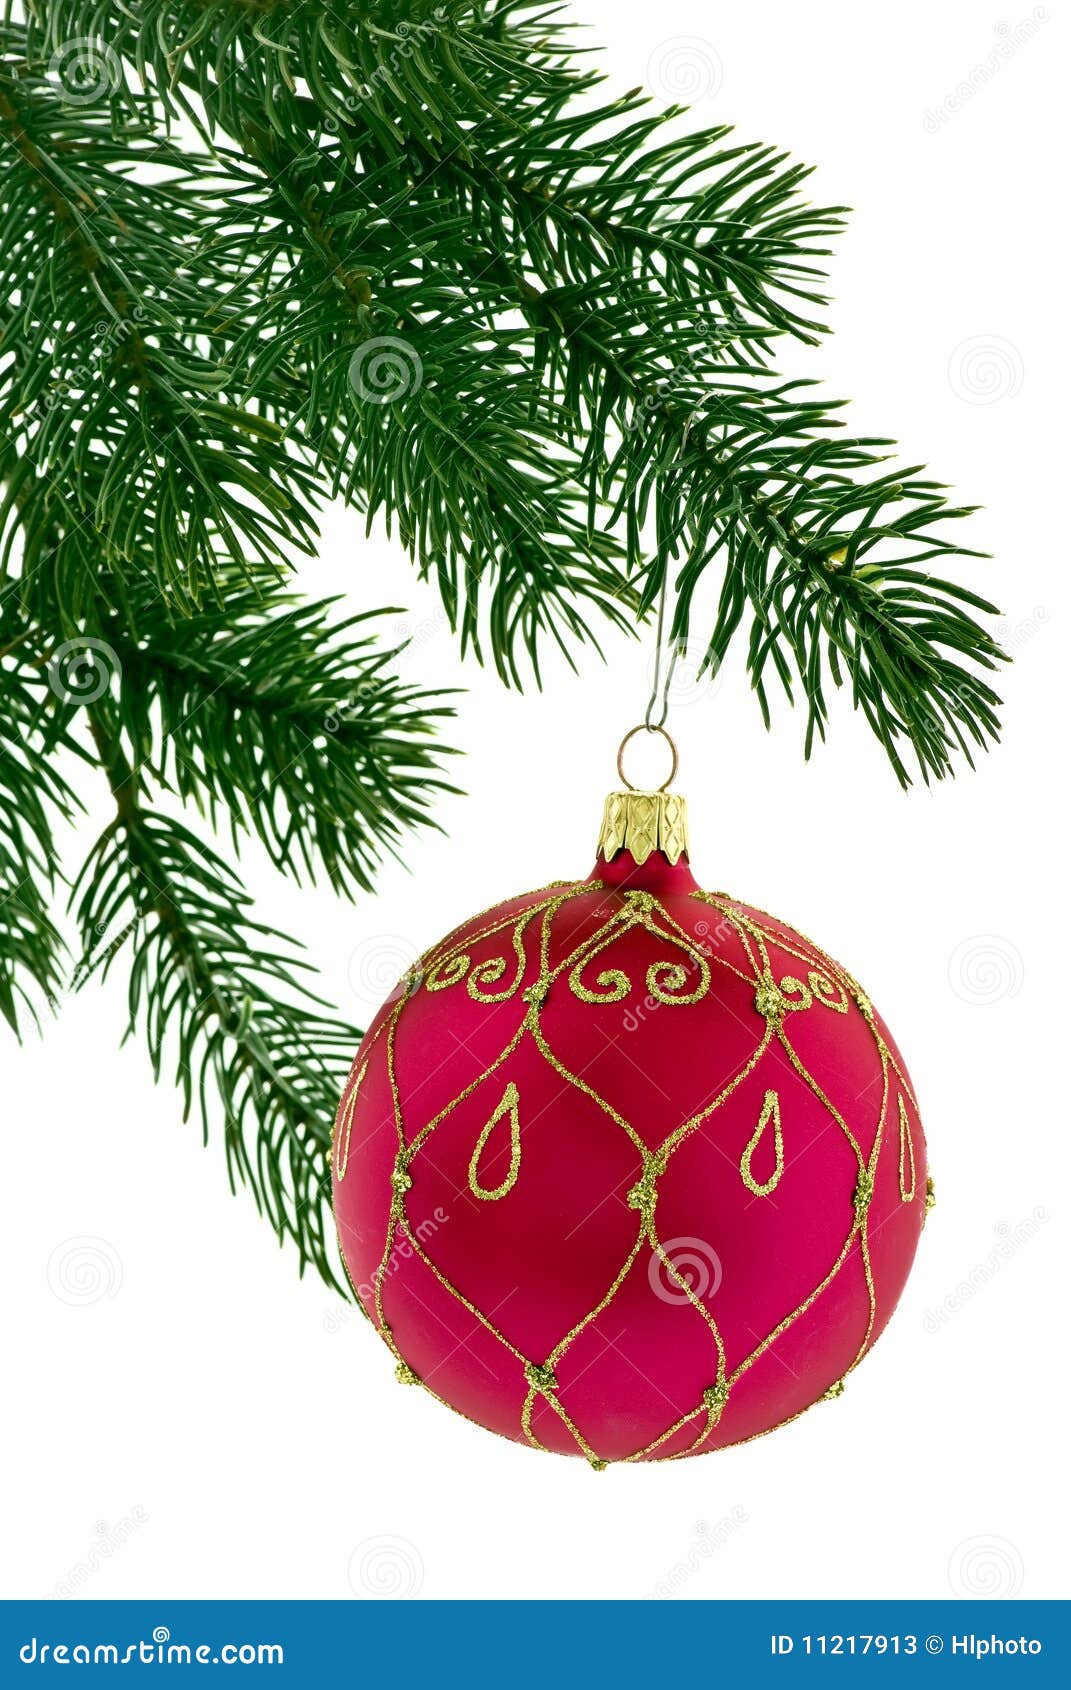 Details about   LAVENDER SEQUINED AND BEADED HANGING CHRISTMAS TREE DECORATION HANDMADE INDIA 